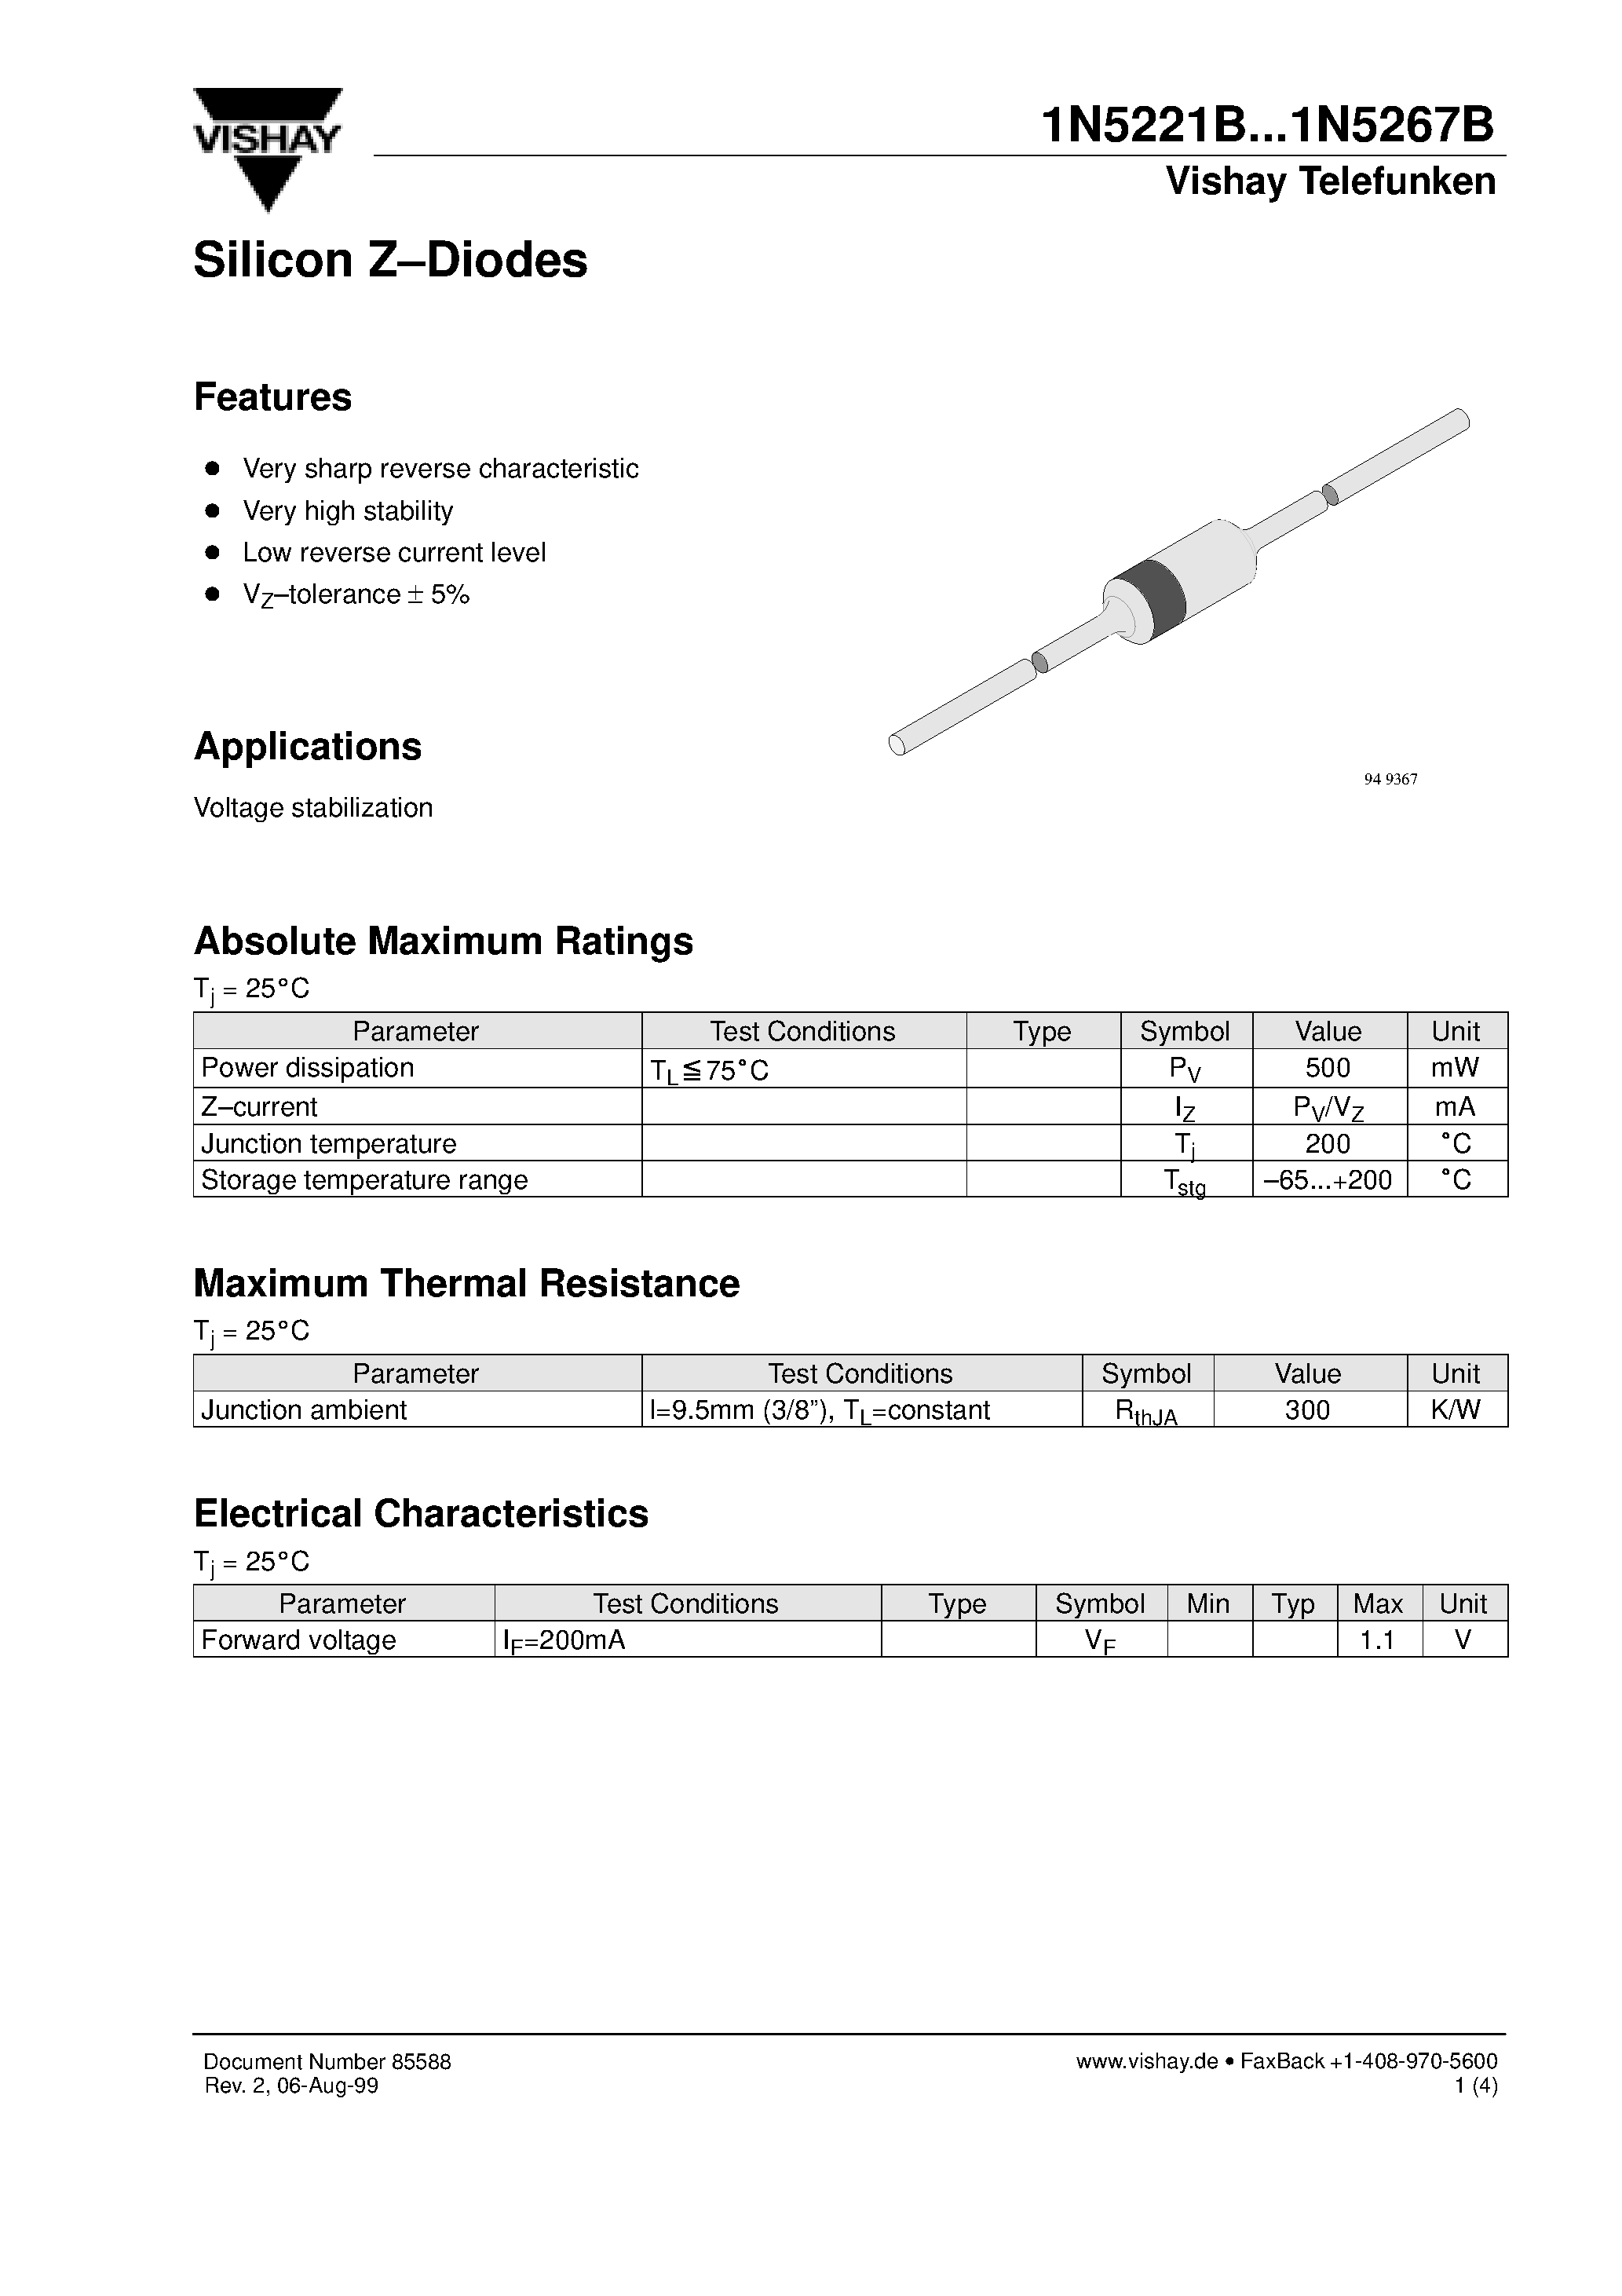 Datasheet 1N5260B - Silicon Z-Diodes page 1